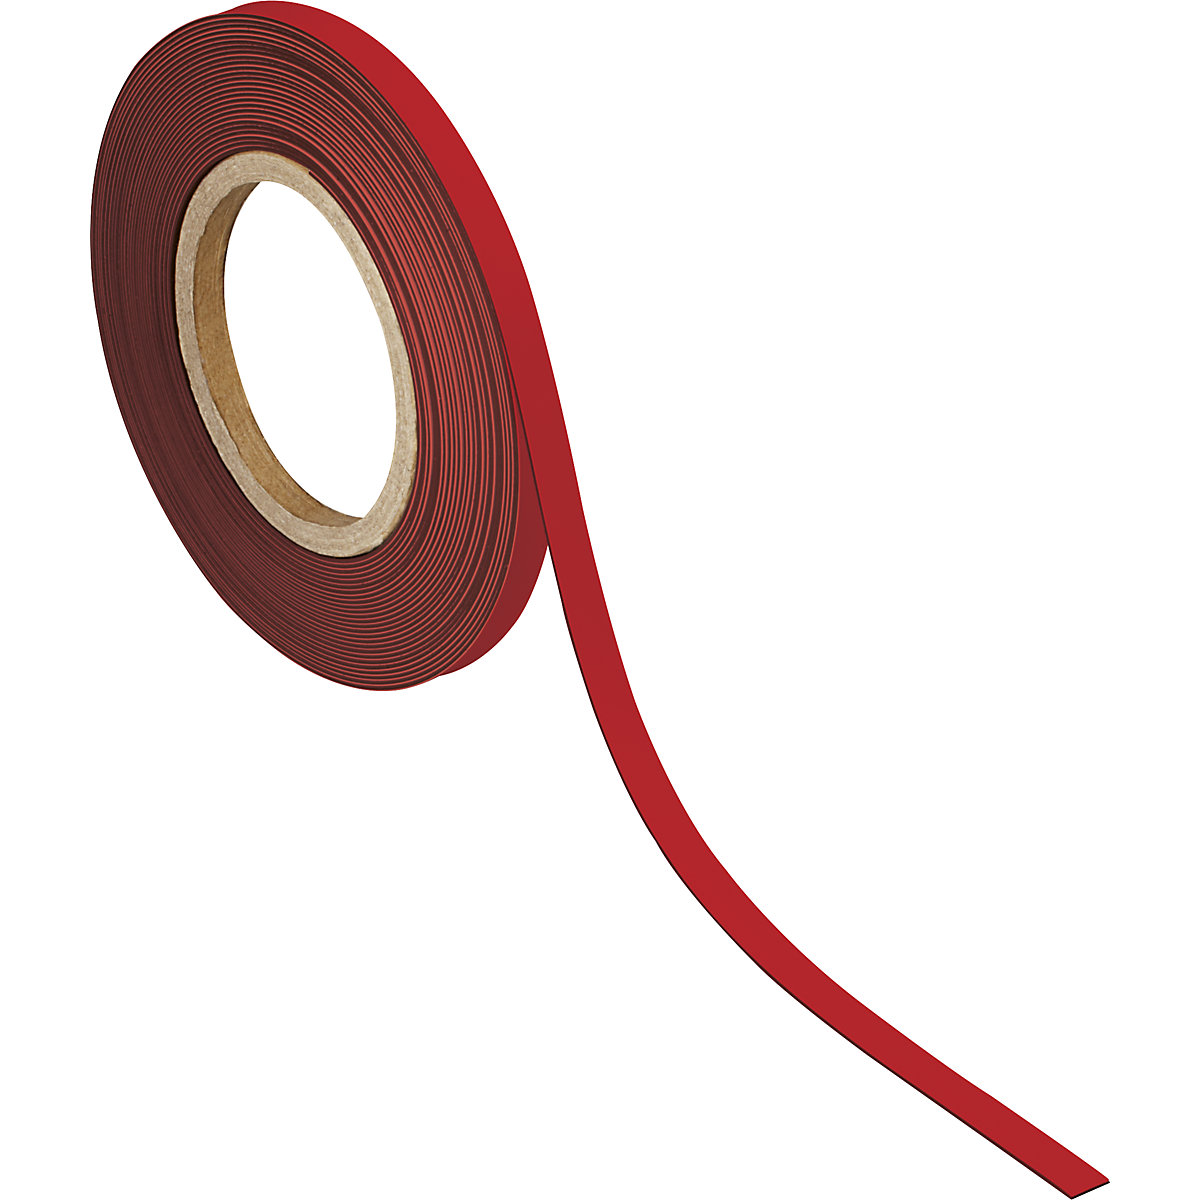 Labelling tape, magnetic – MAUL